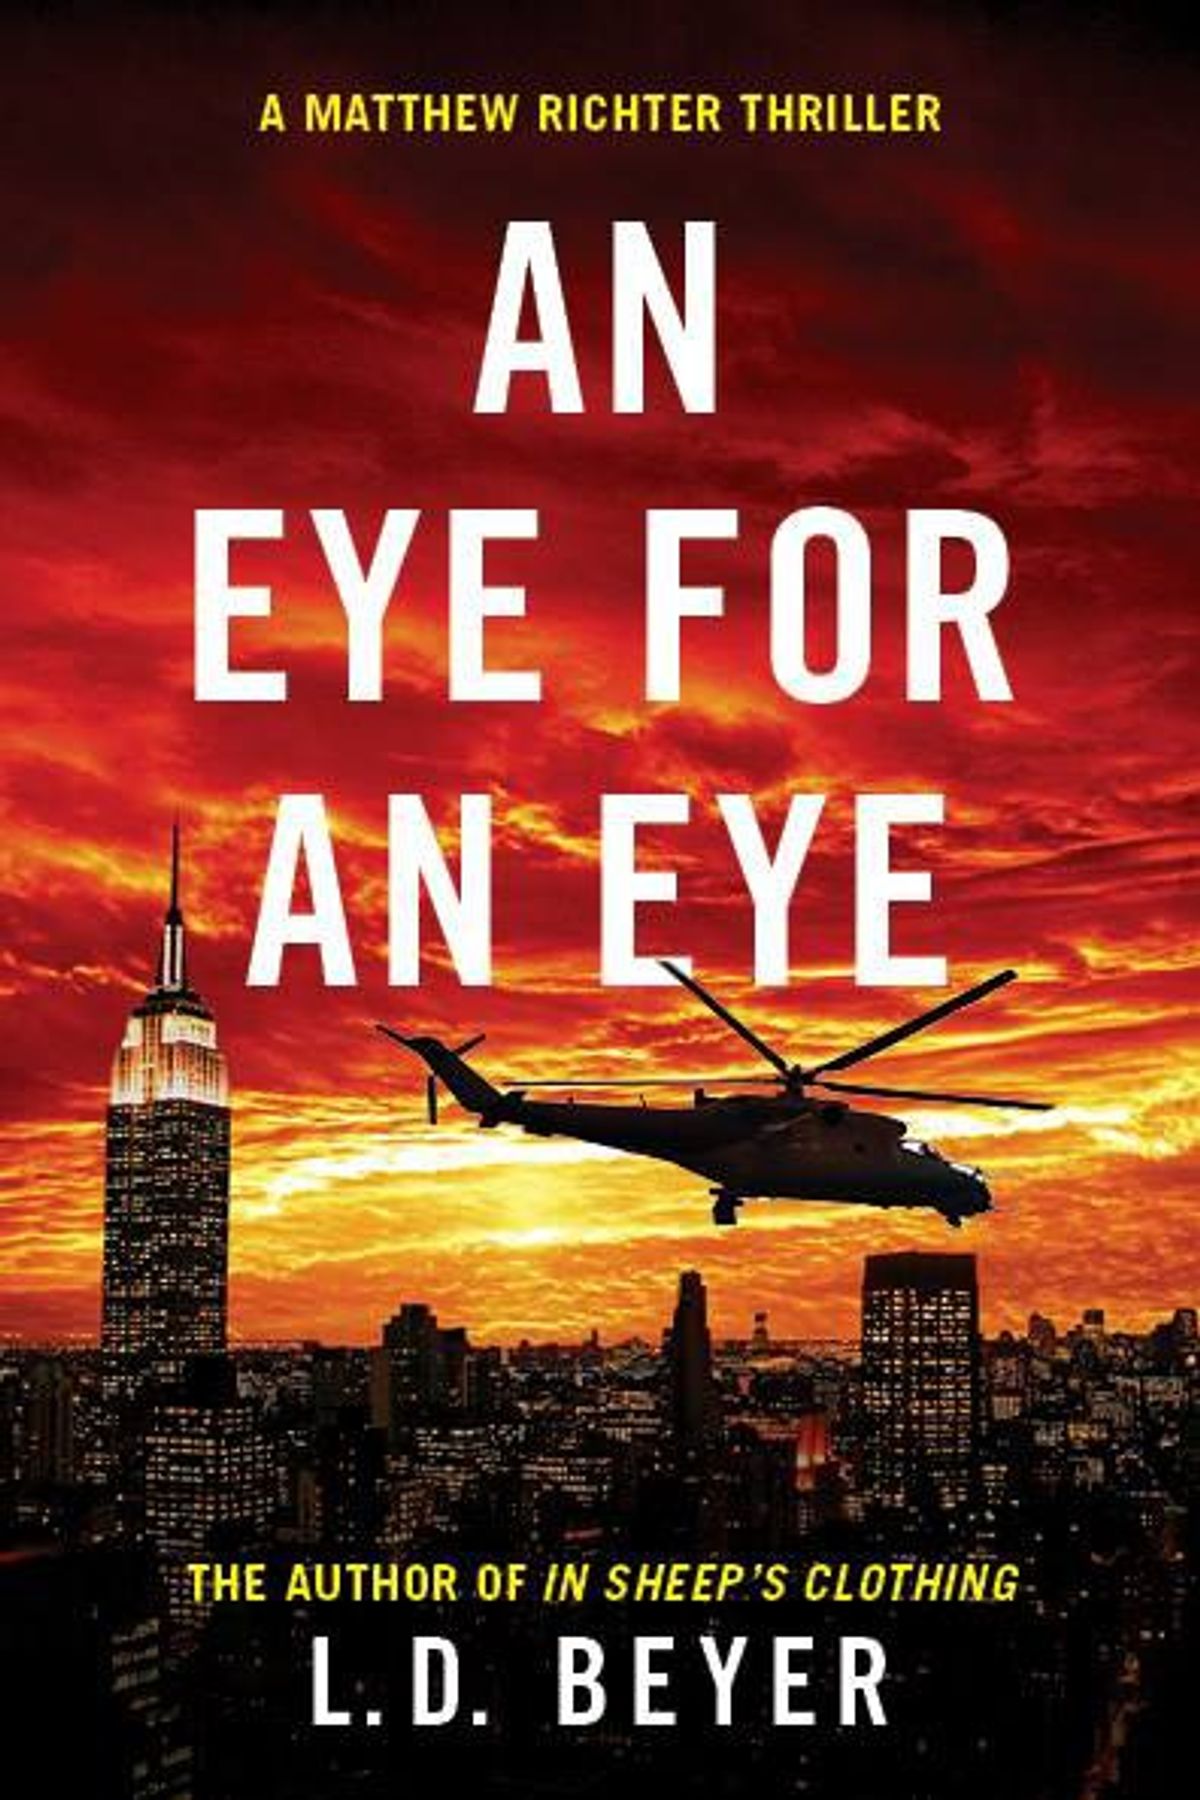 A Review Of "An Eye For An Eye"